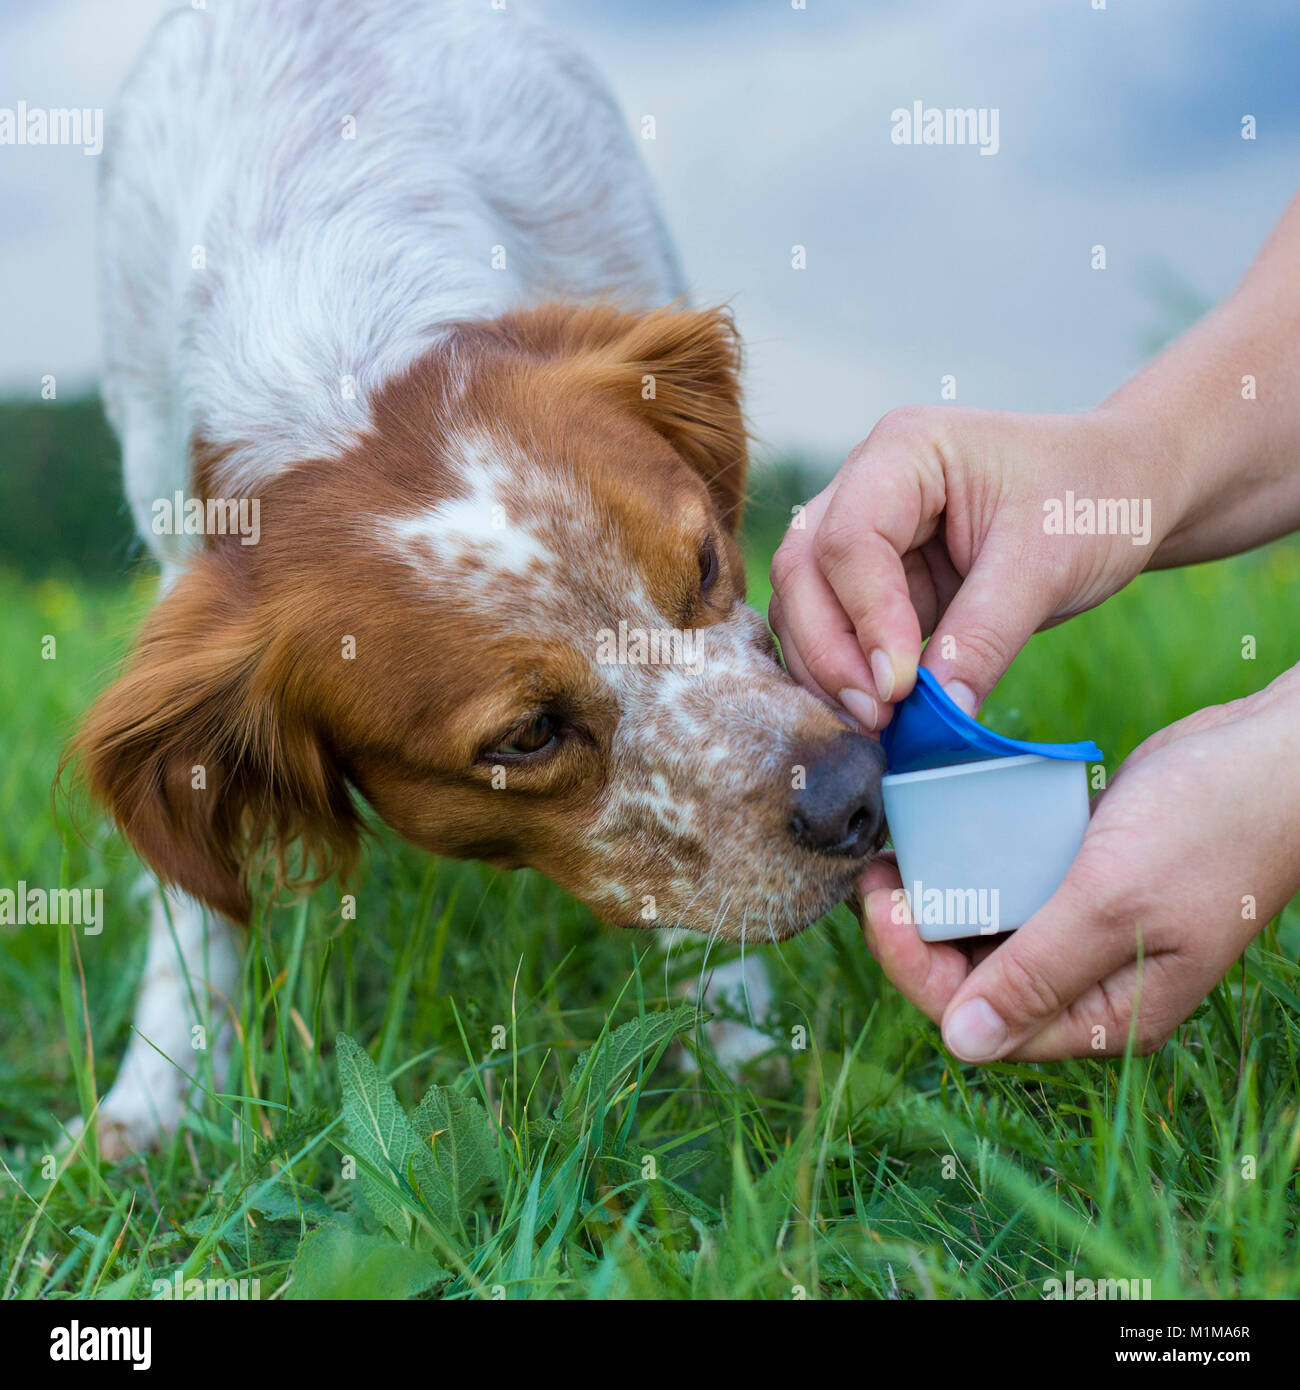 Brittany. After finding a box with food, the dog gets a reward. Germany Stock Photo